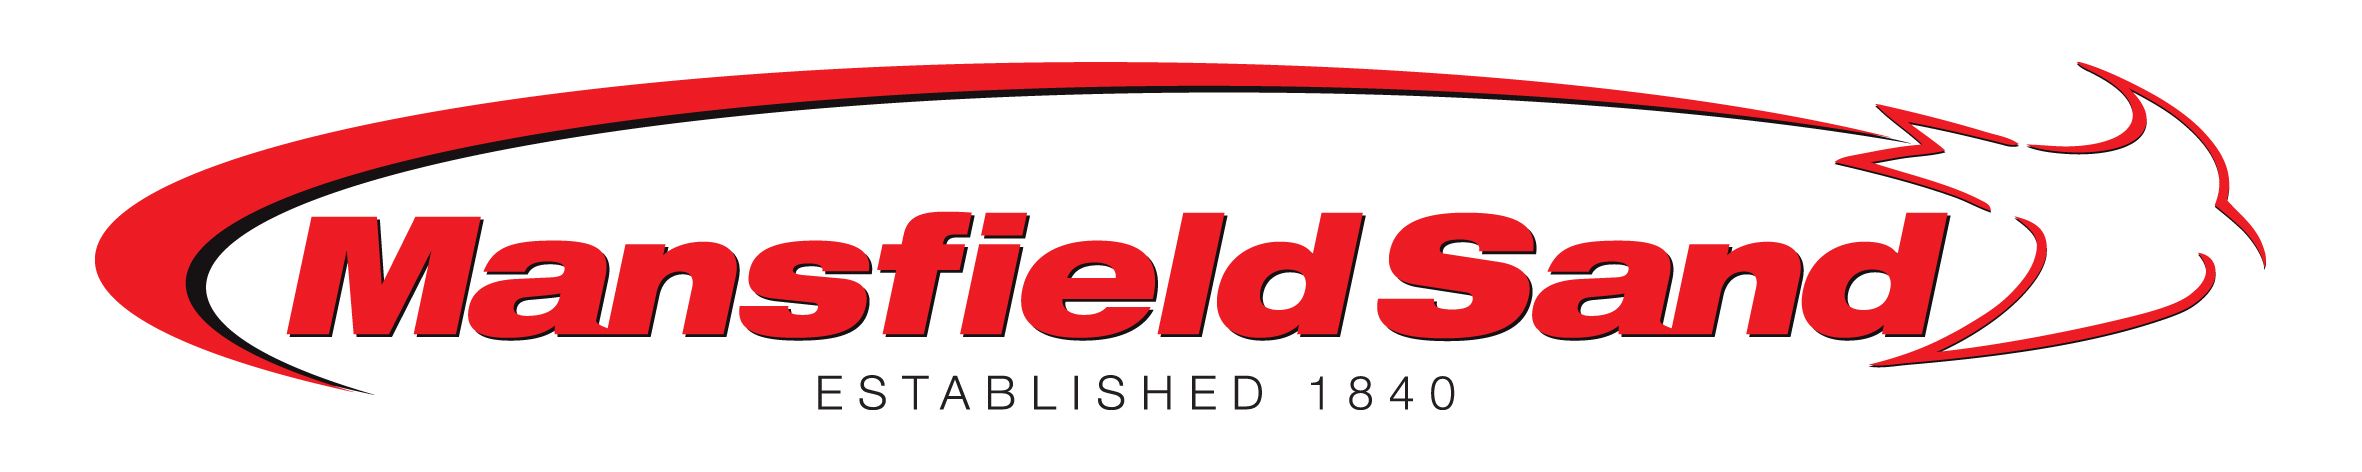 Mansfield Sand Limited